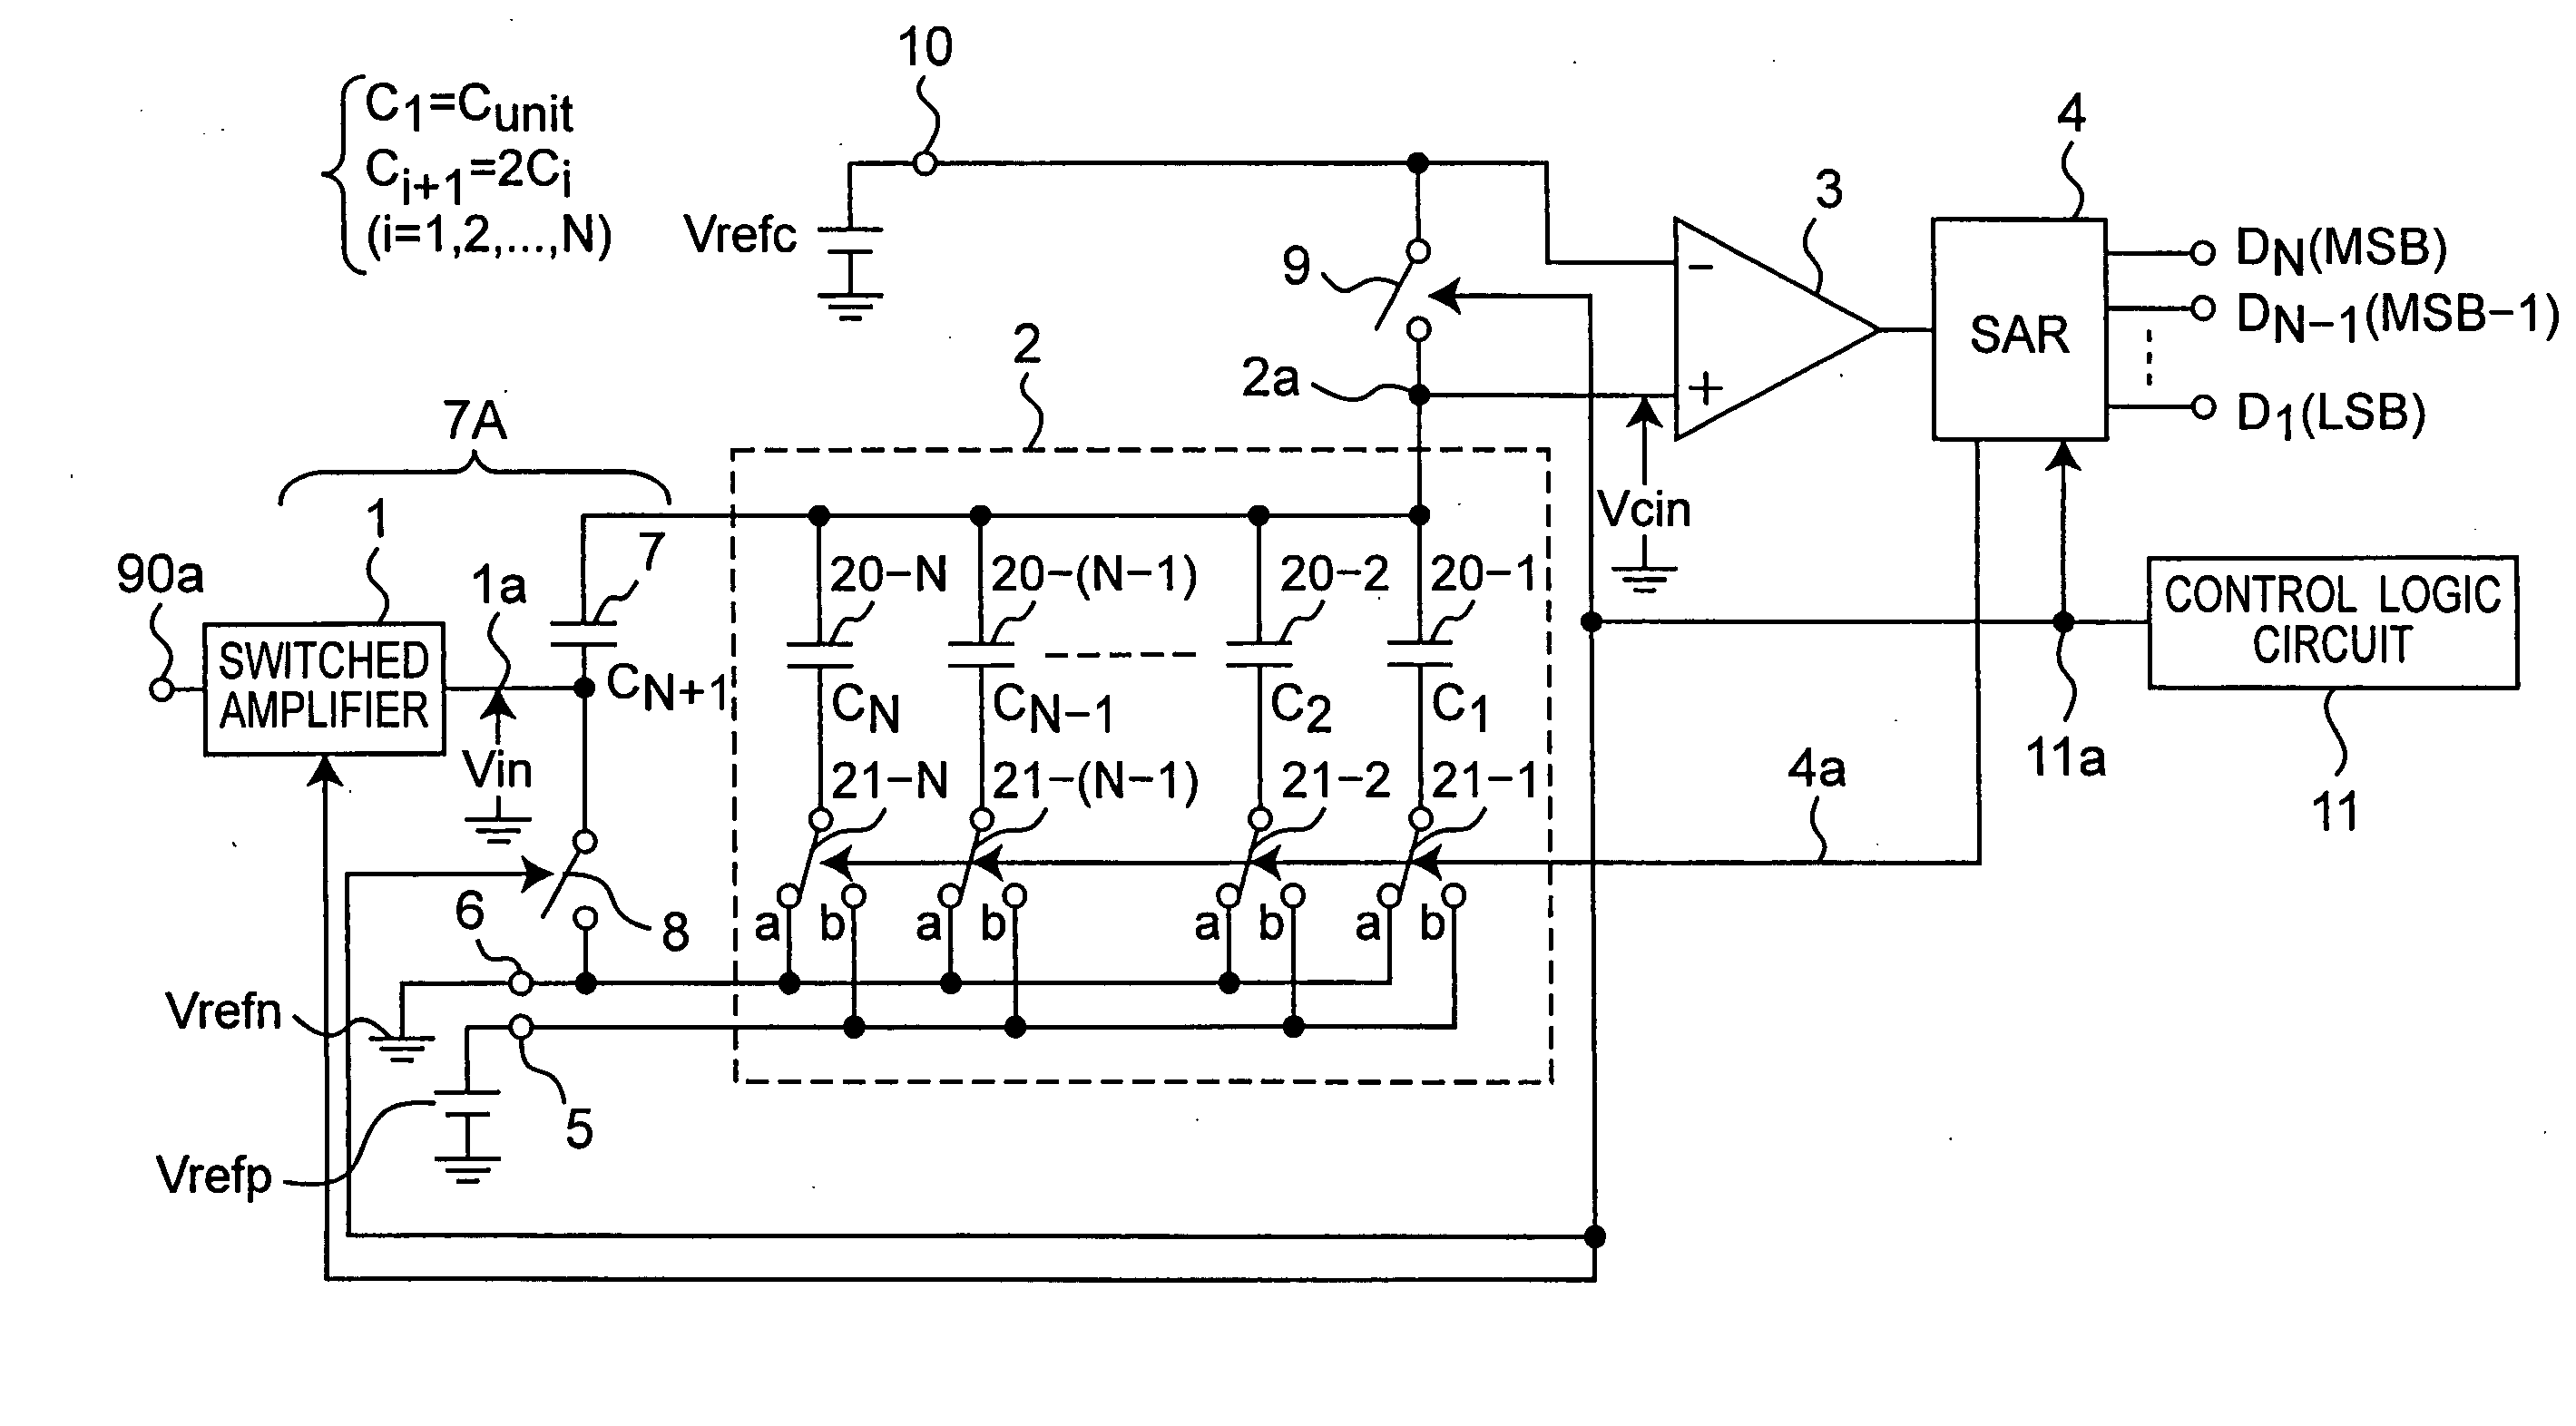 Analog to digital converter circuit of successive approximation type operating at low voltage